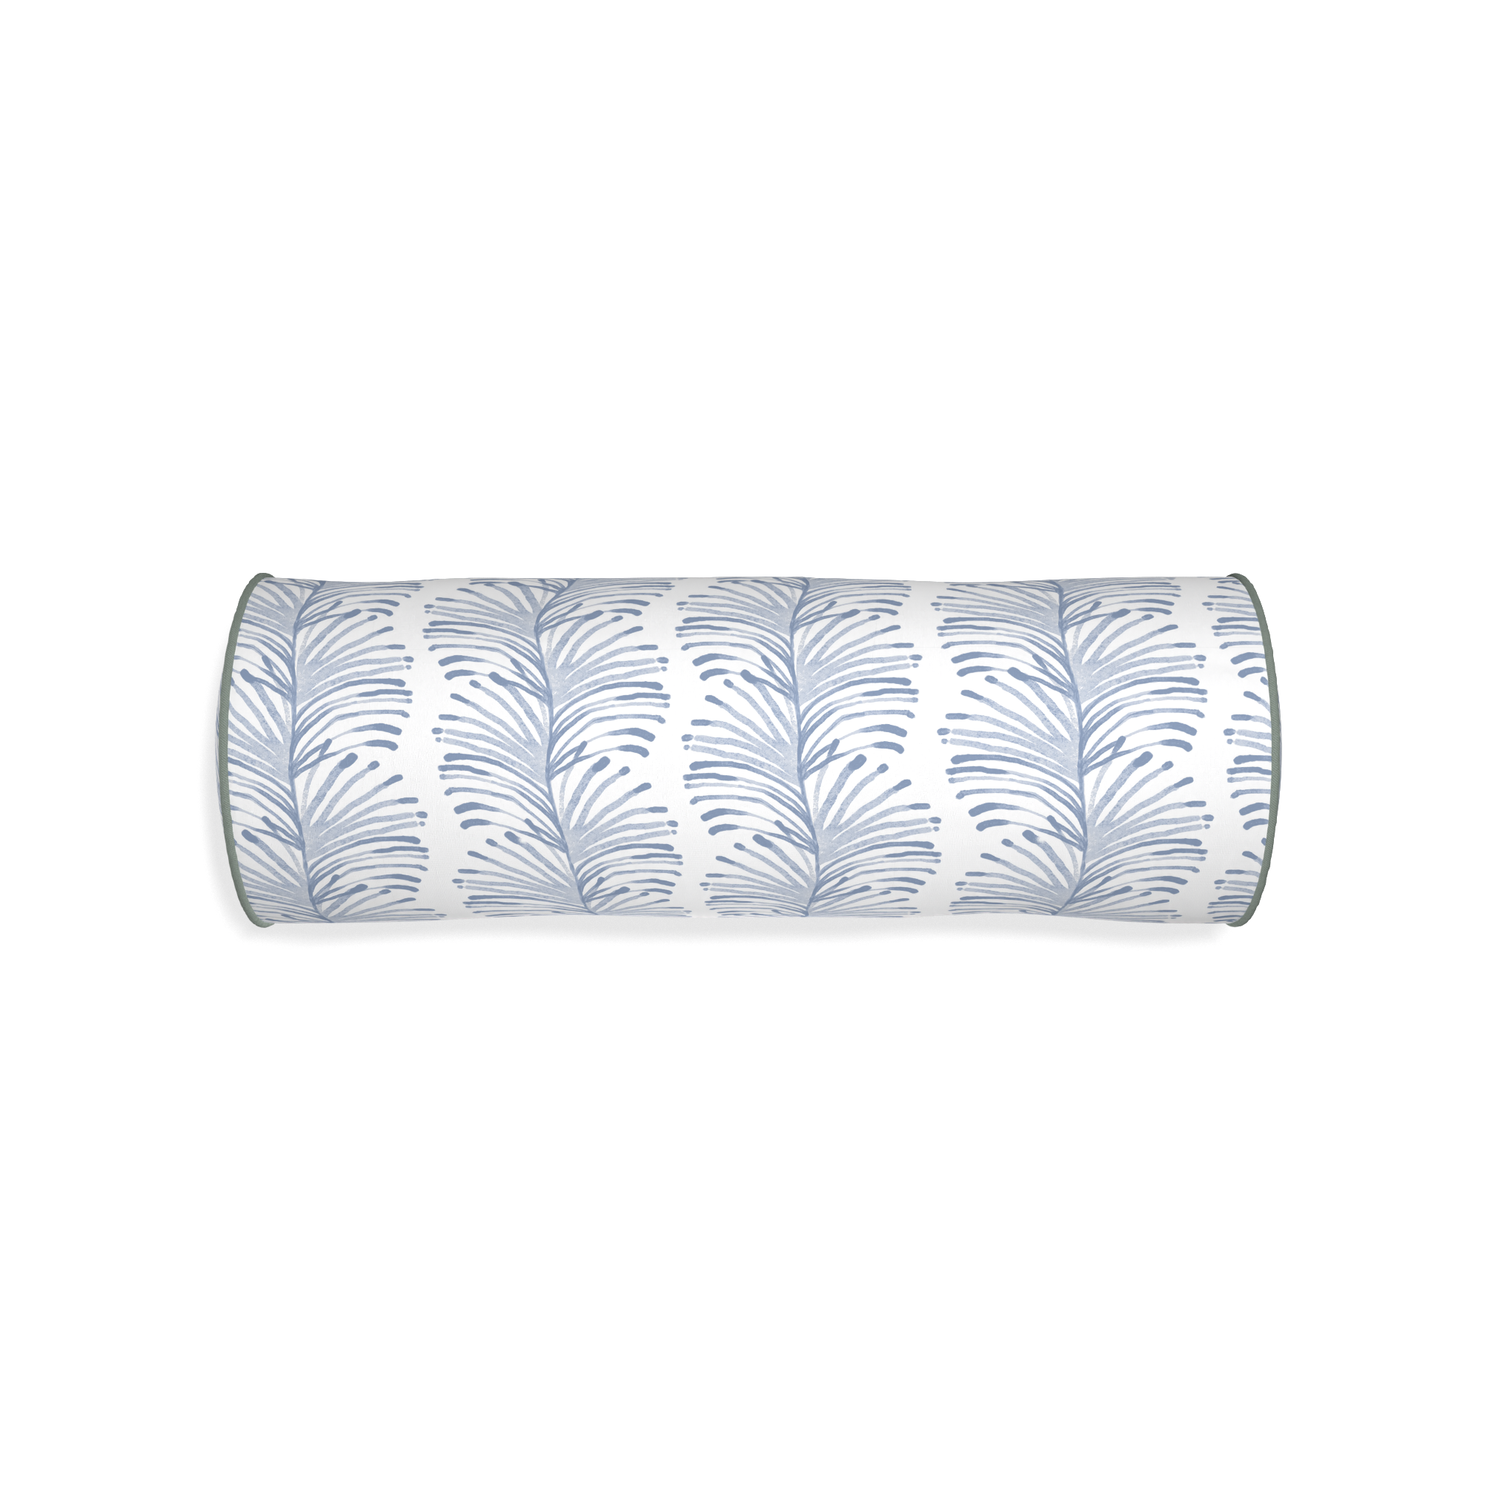 Bolster emma sky custom sky blue botanical stripepillow with sage piping on white background